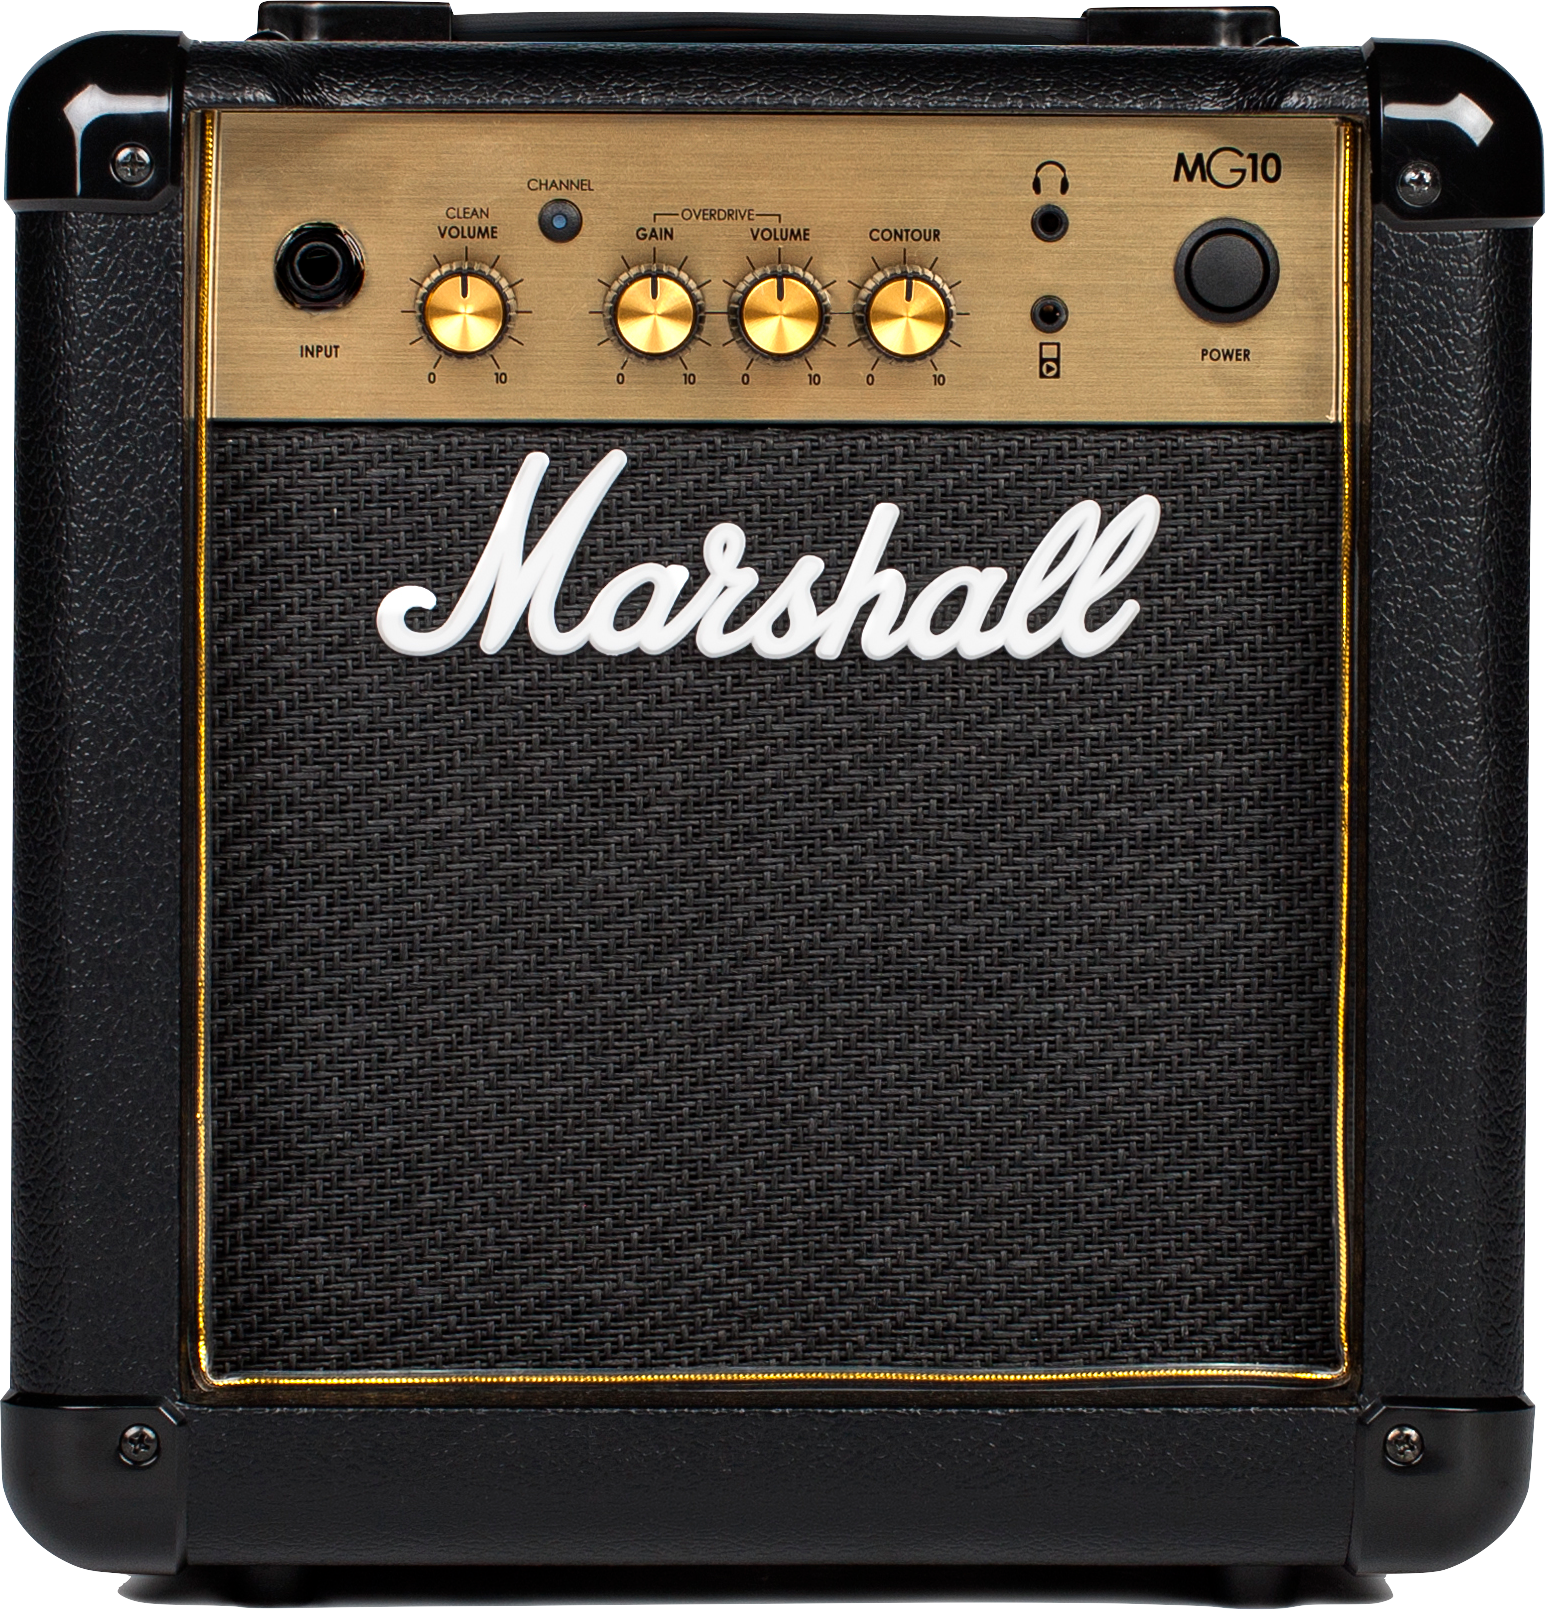 Marshall Mg10g Gold Combo 10 W - Electric guitar combo amp - Variation 1